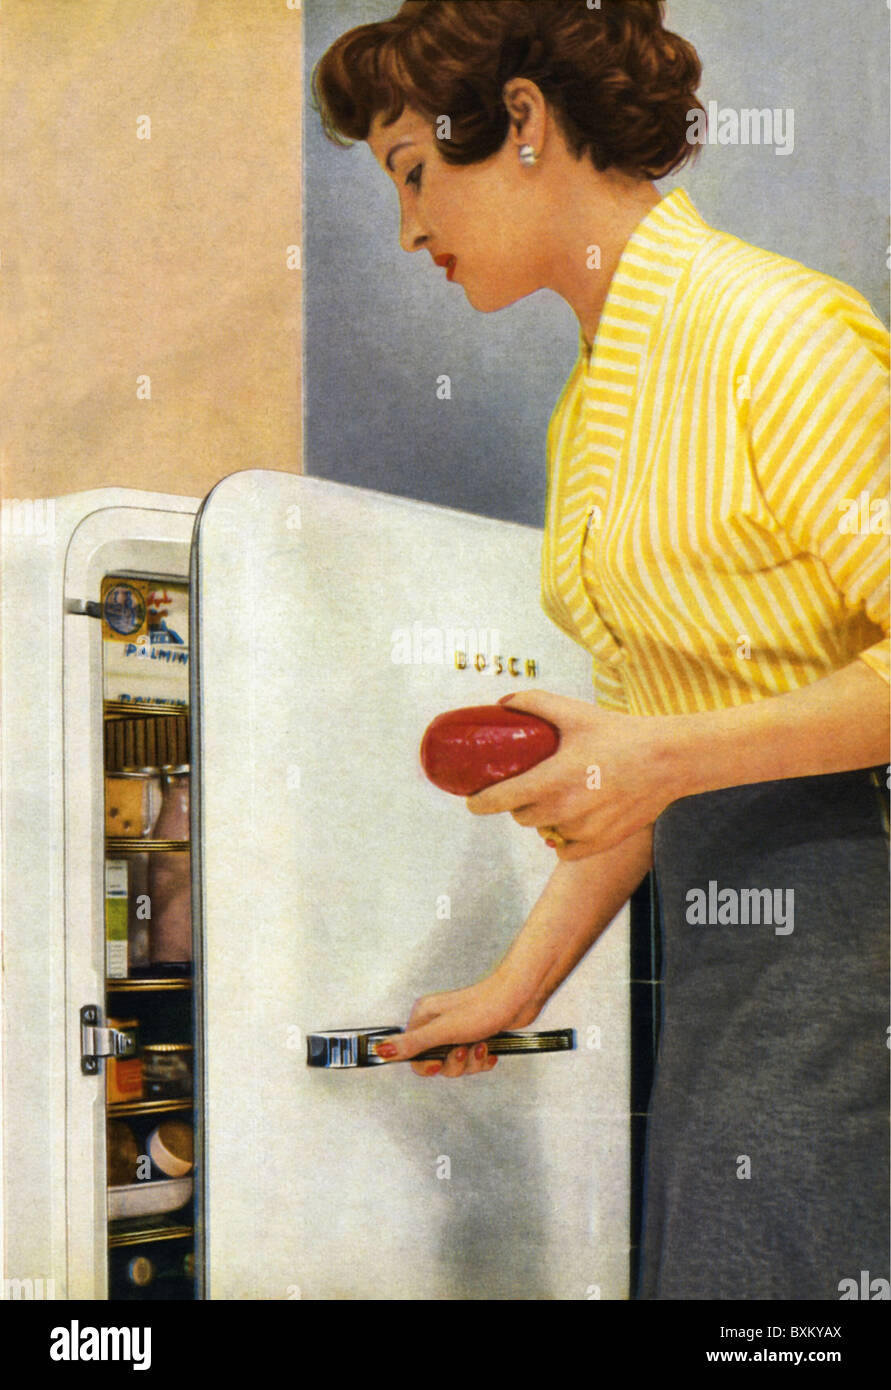 household, kitchen and kitchenware, Bosch refrigerator, woman opens fridge, Germany, 1956, Additional-Rights-Clearences-Not Available Stock Photo